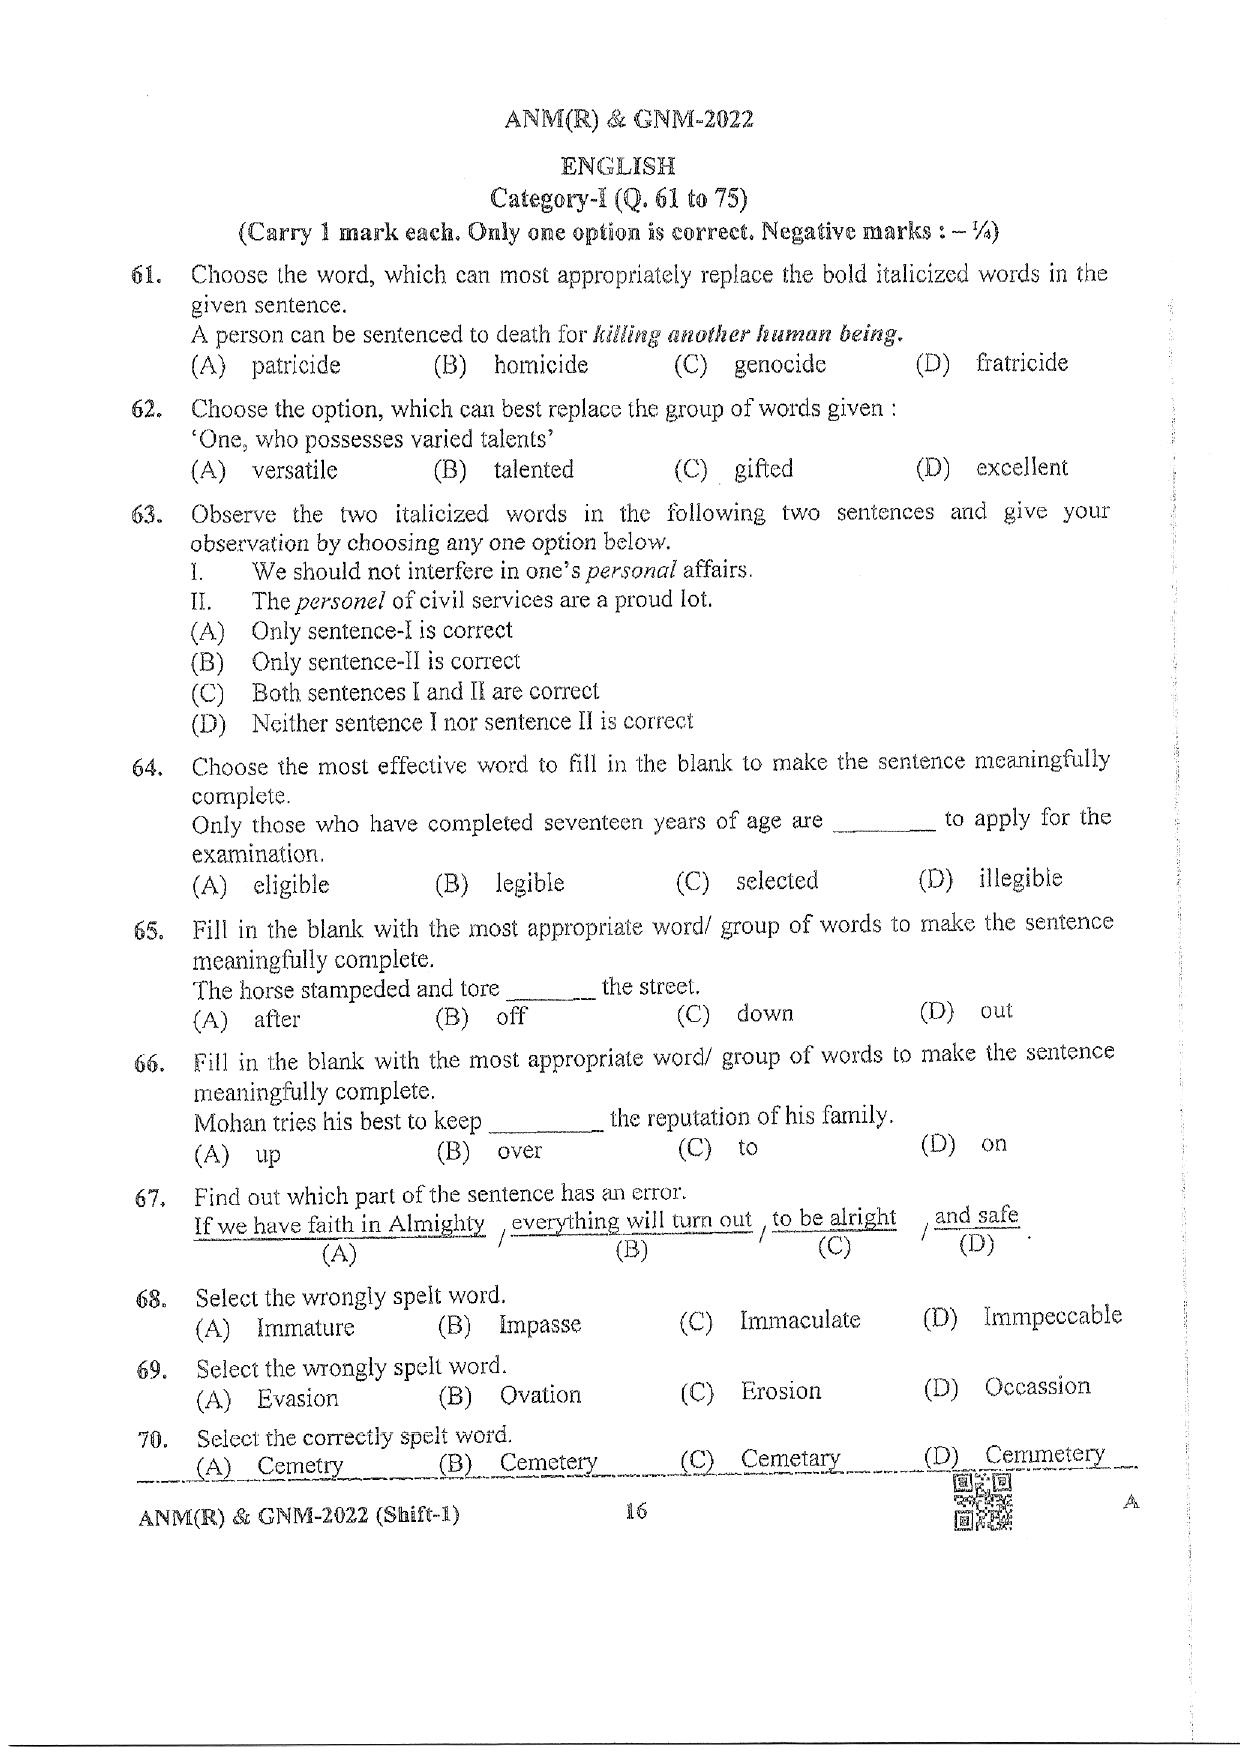 WB ANM GNM 2022 Question Paper - Page 16